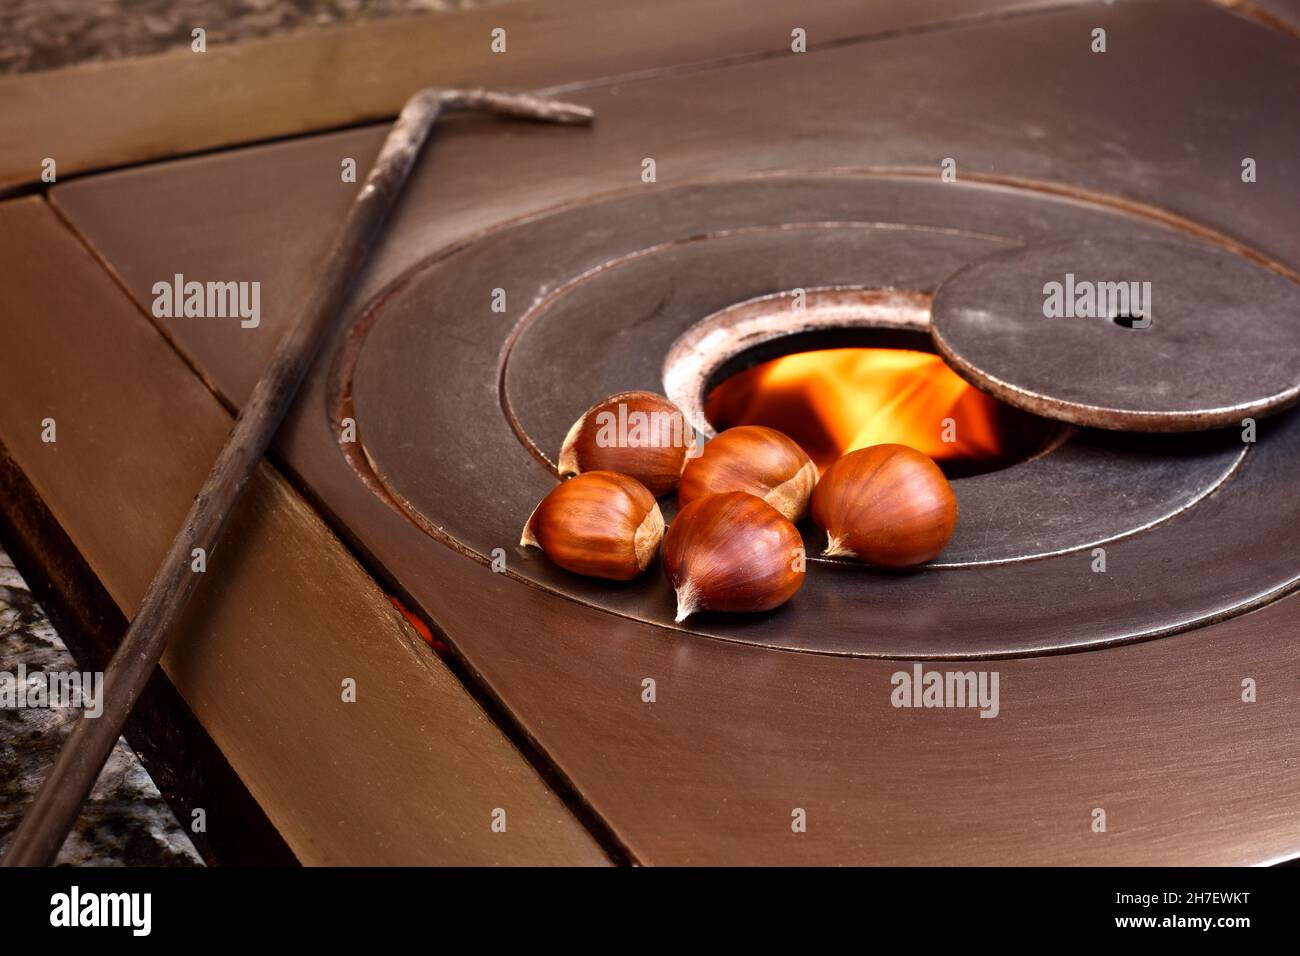 Photograph of some chestnuts over a charcoal stove fire.The photo has a vintage style and is taken in horizontal format. Stock Photo